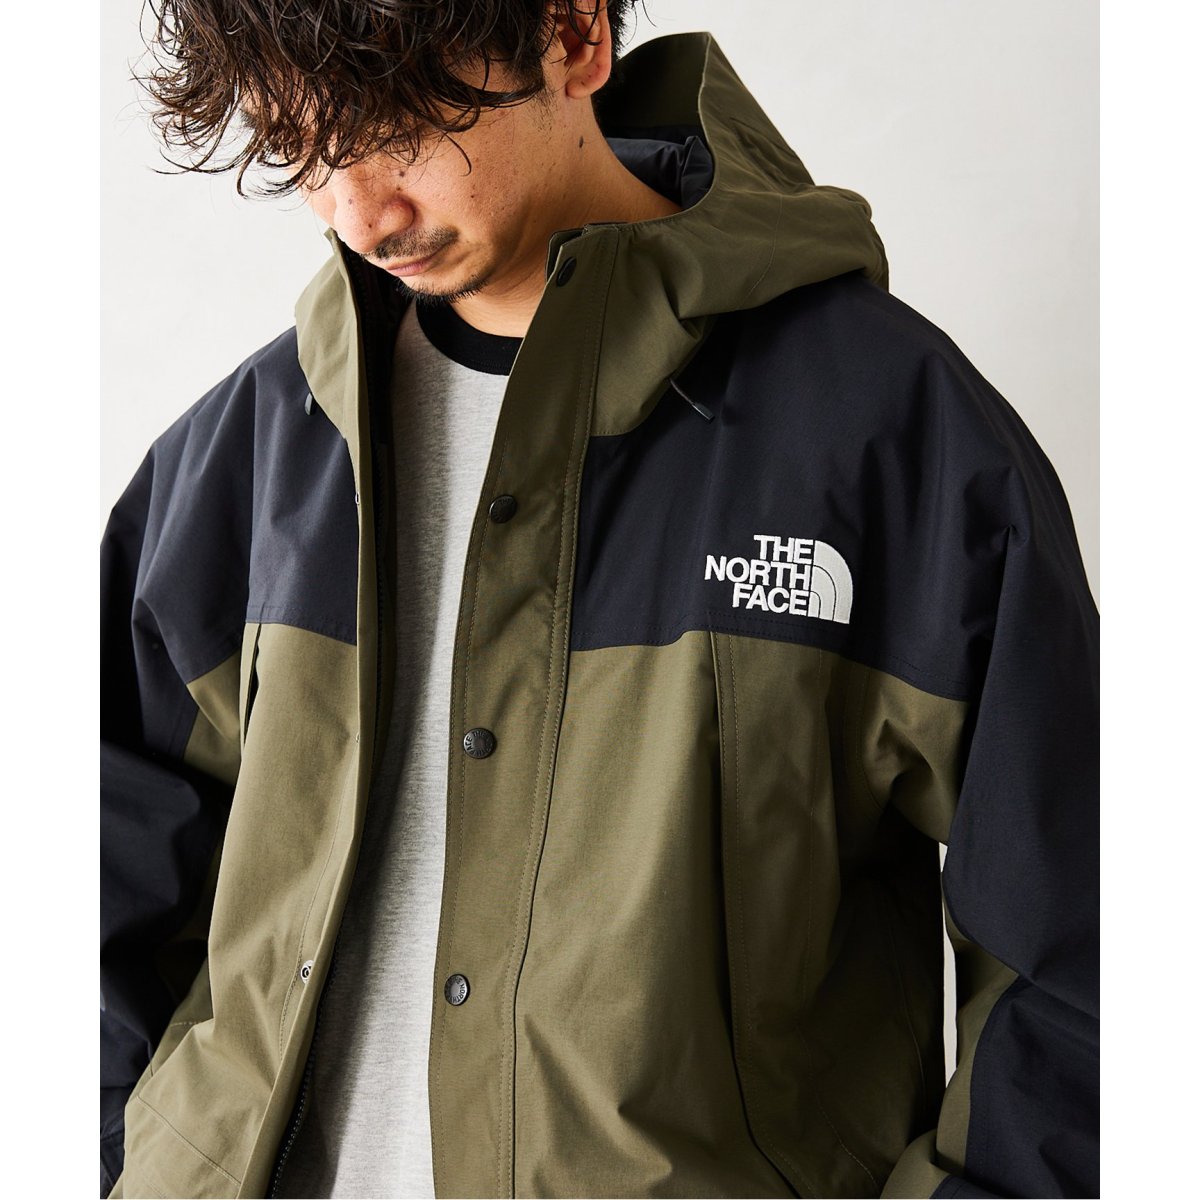 THE NORTH FACE / ザノースフェイス】Mountain Light Jacket